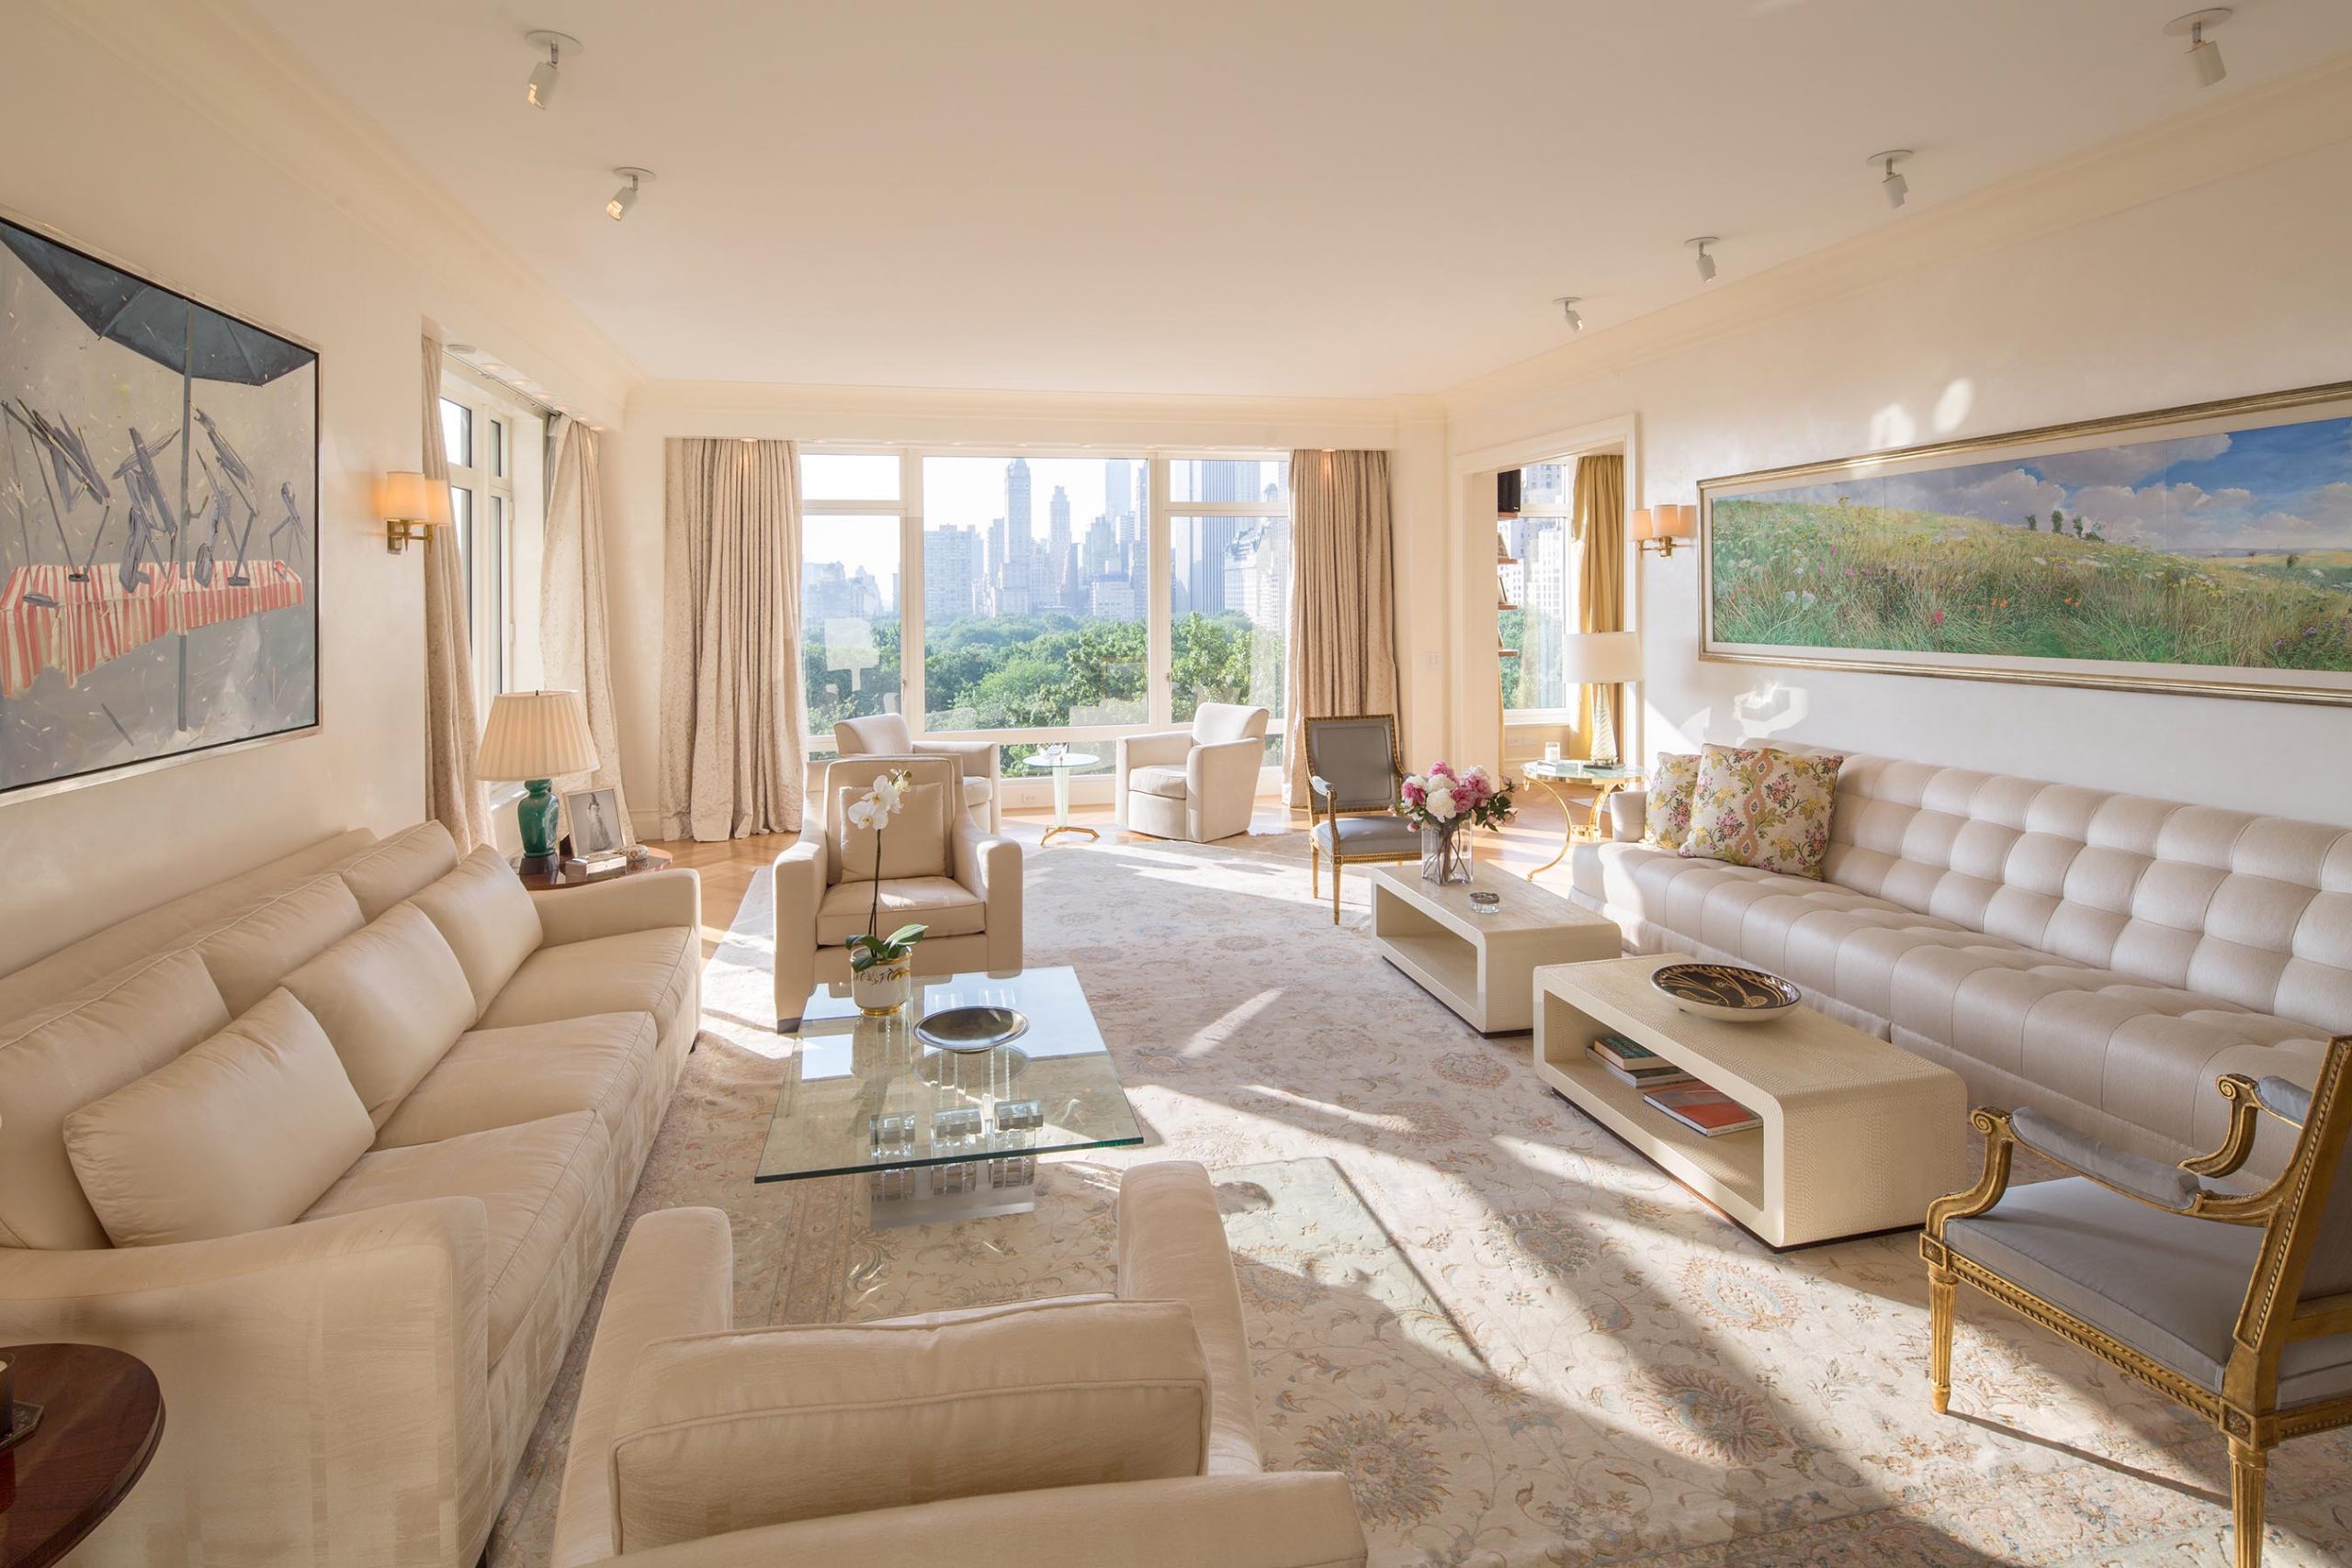 5 Central Park West, Living Room Design by Interior designer Kevin Gray, Kevin Gray Design, Photo by Robin Hill